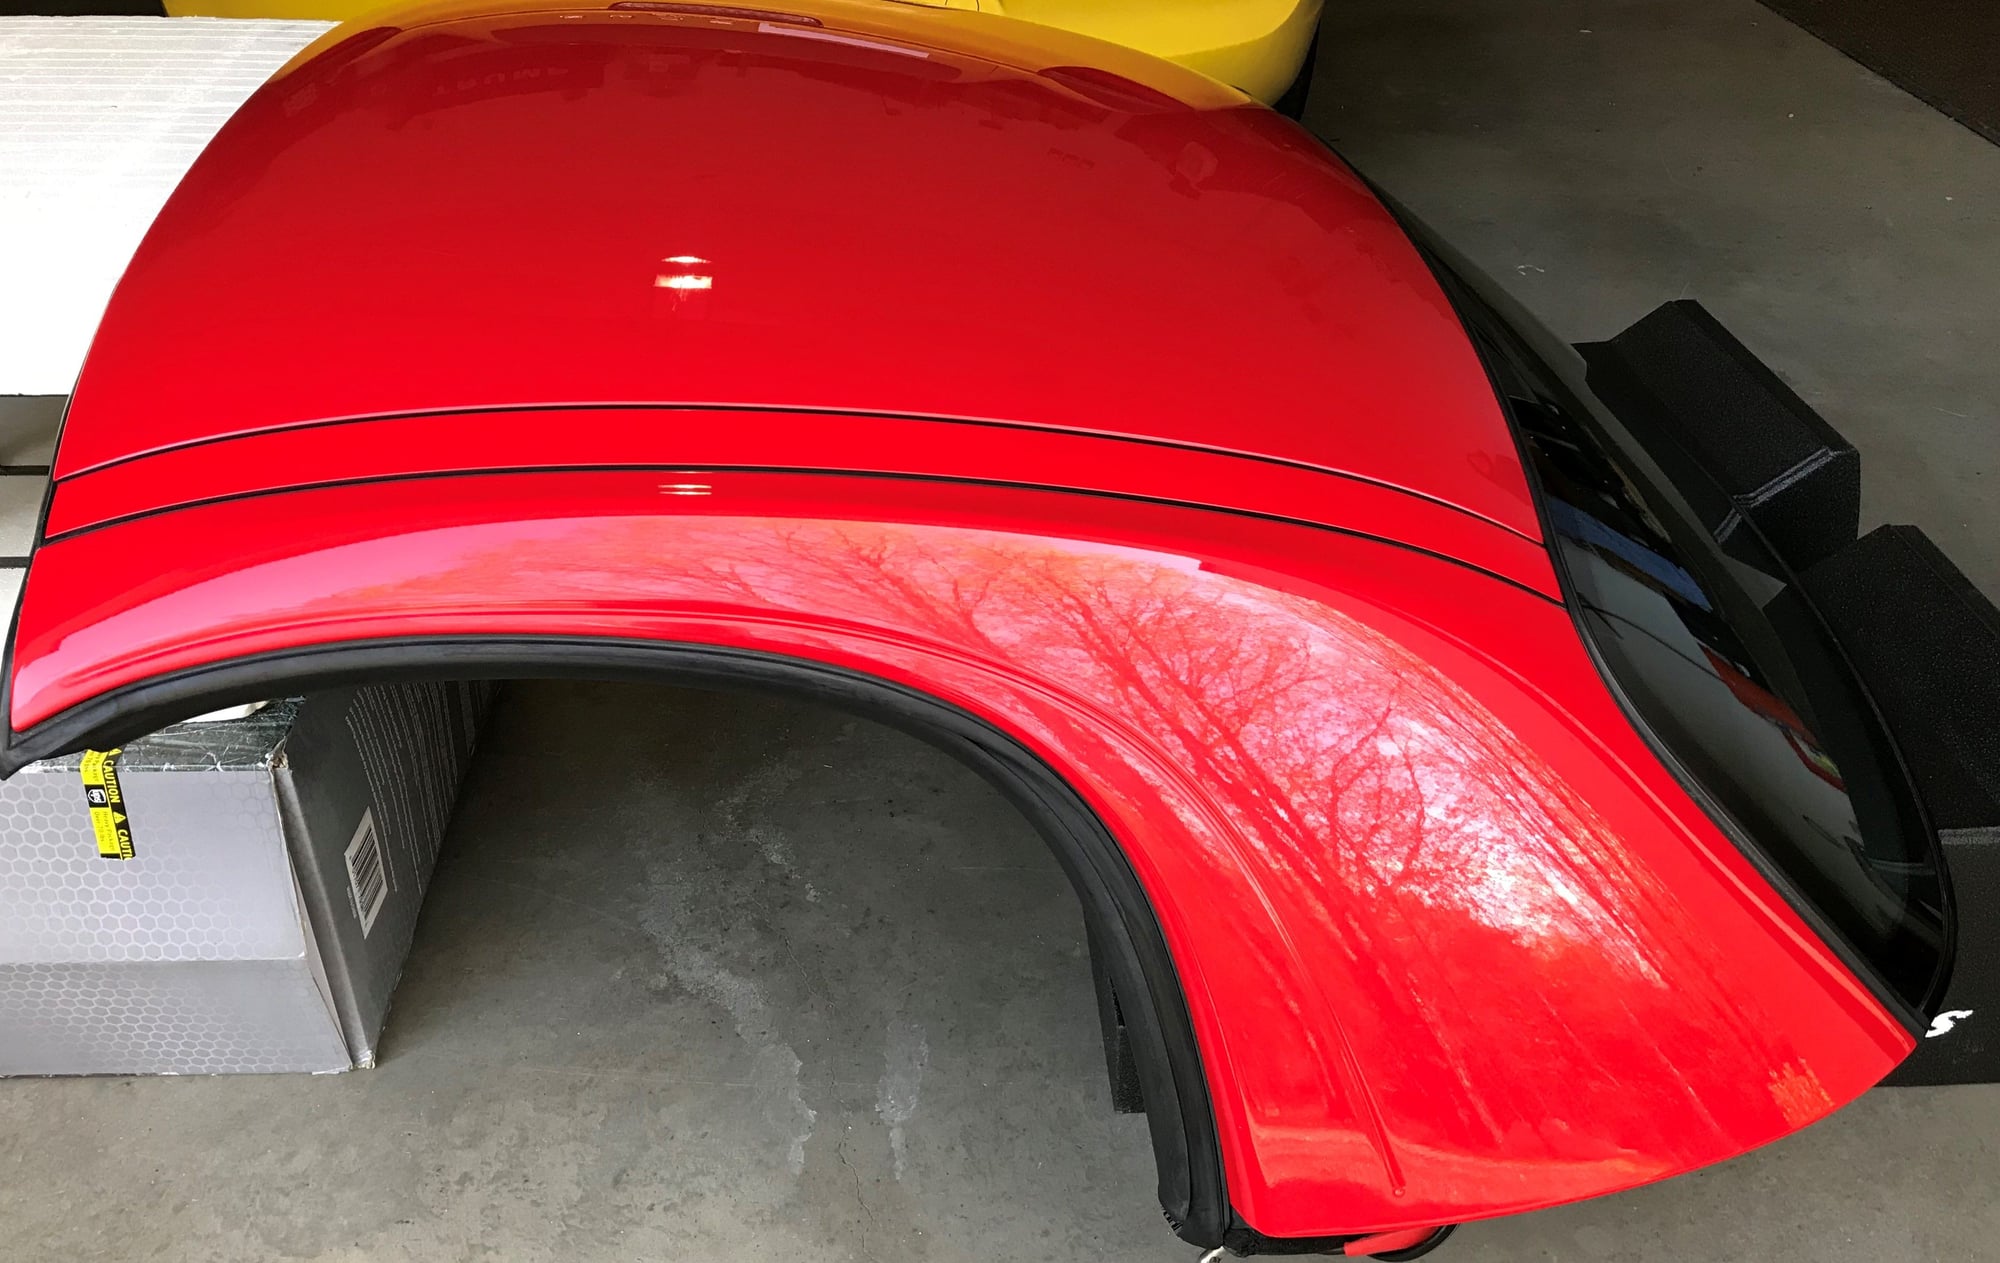 Exterior Body Parts - Porsche 986 Boxster Hardtop, Cart, Cover - Used - 1996 to 2004 Porsche Boxster - Keene, NH 03431, United States